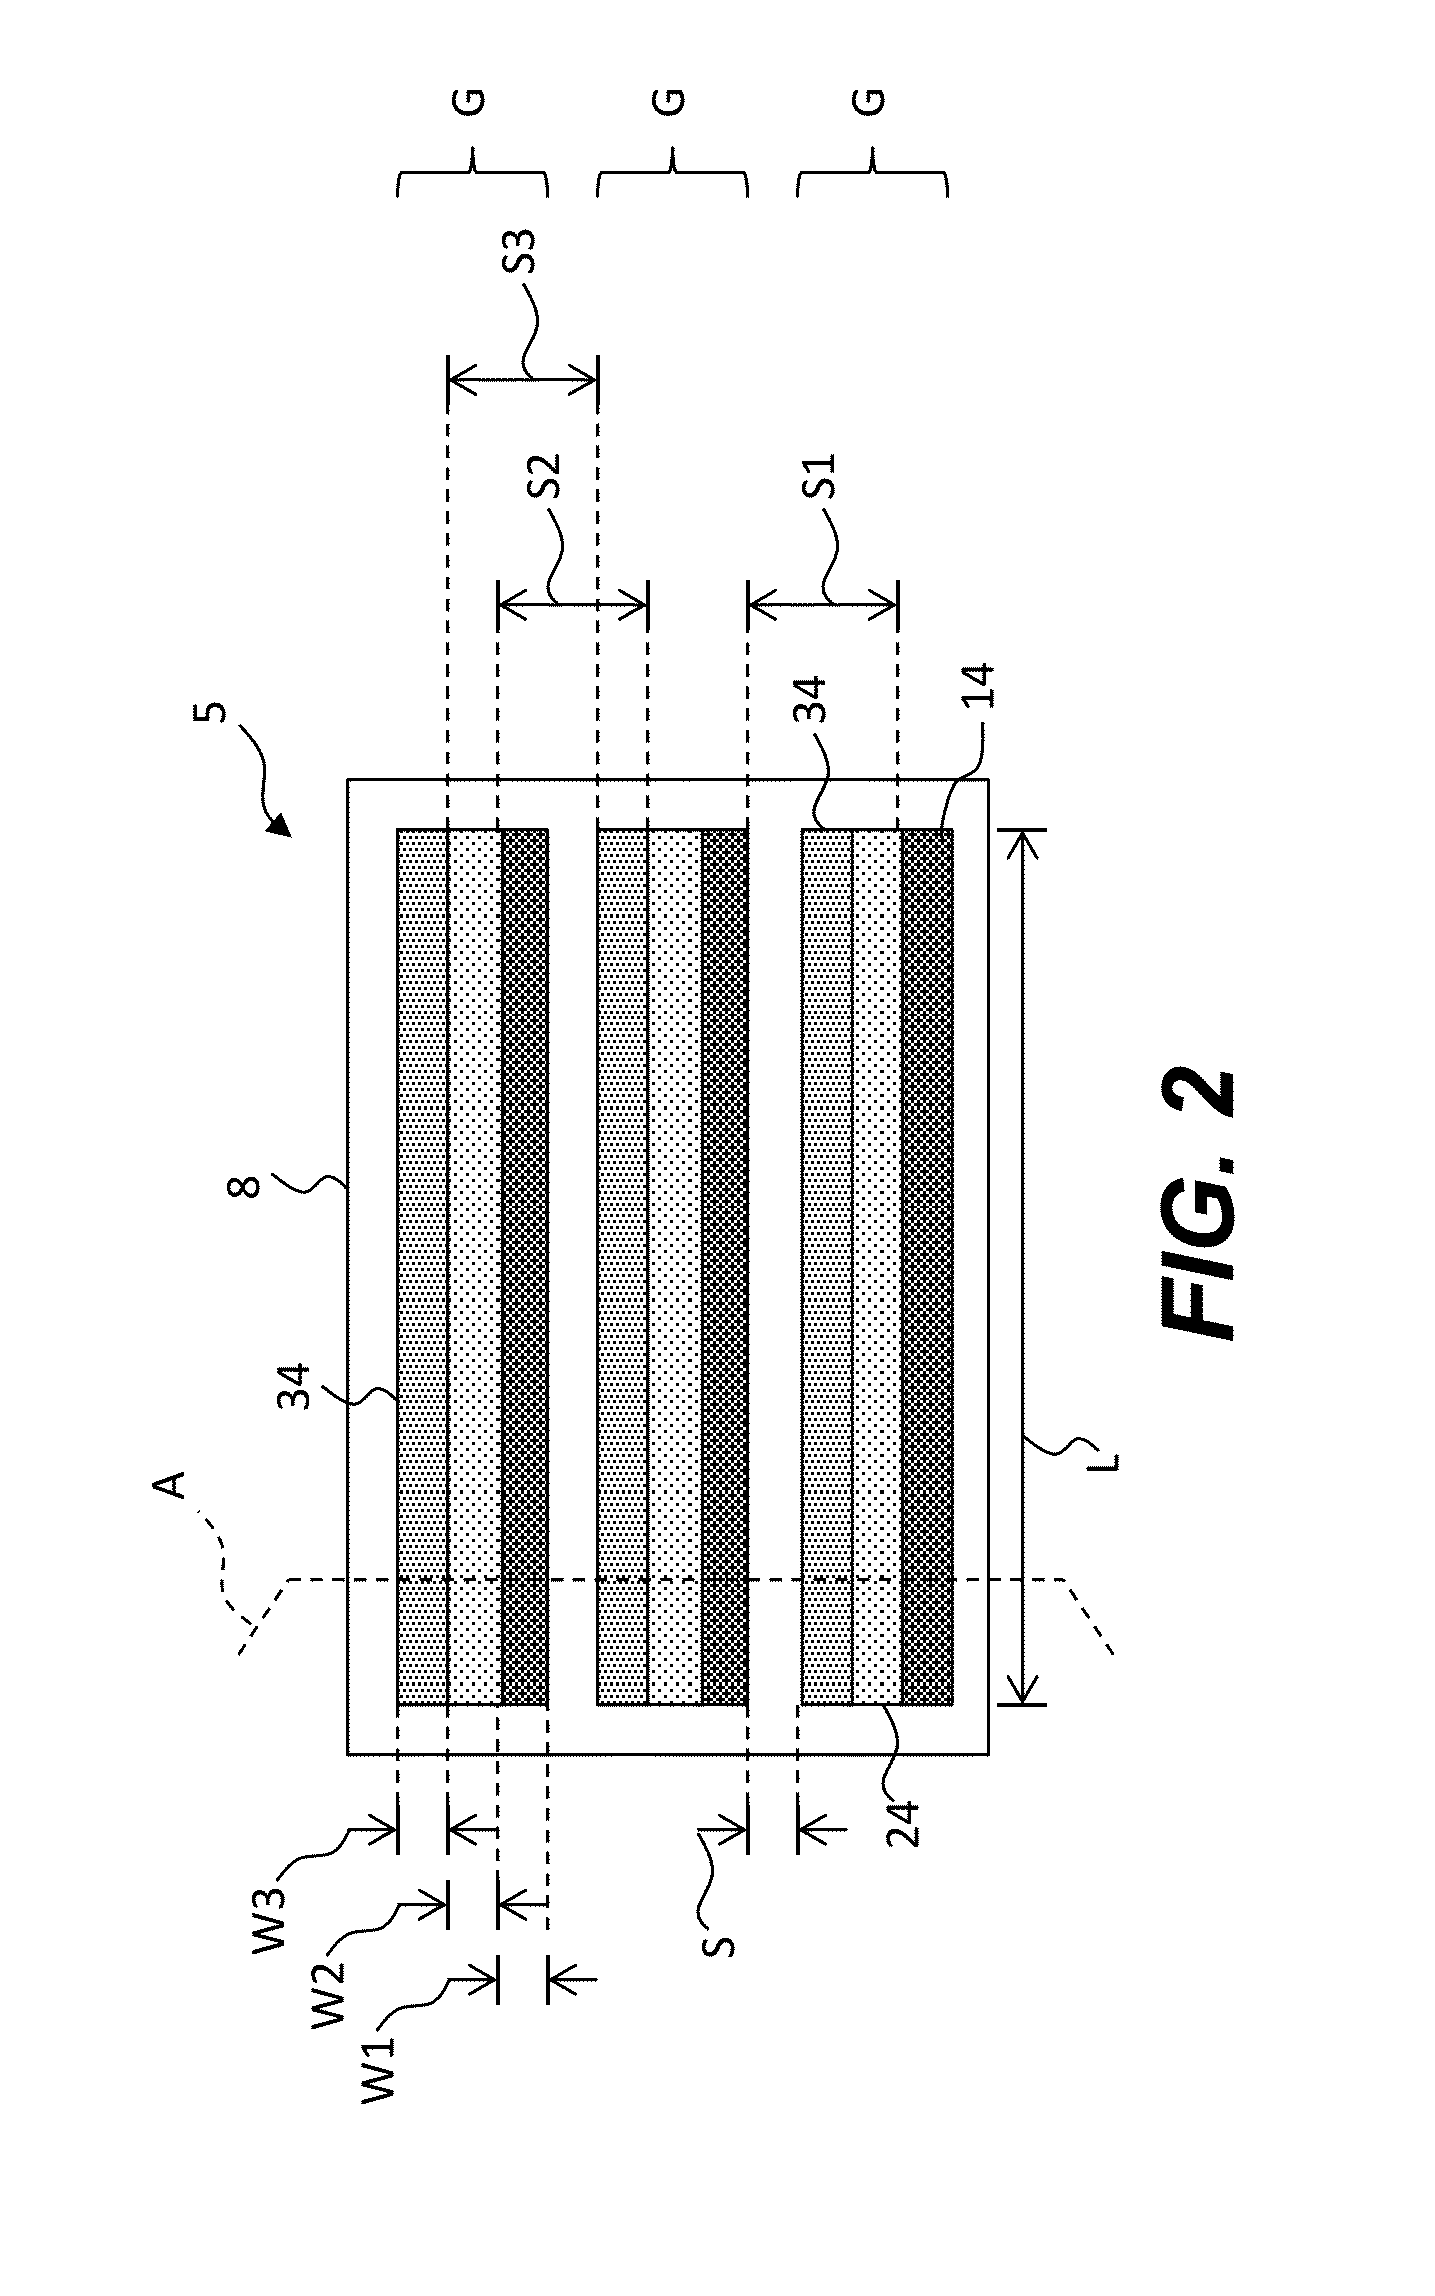 Multi-layer large-format imprinted structure